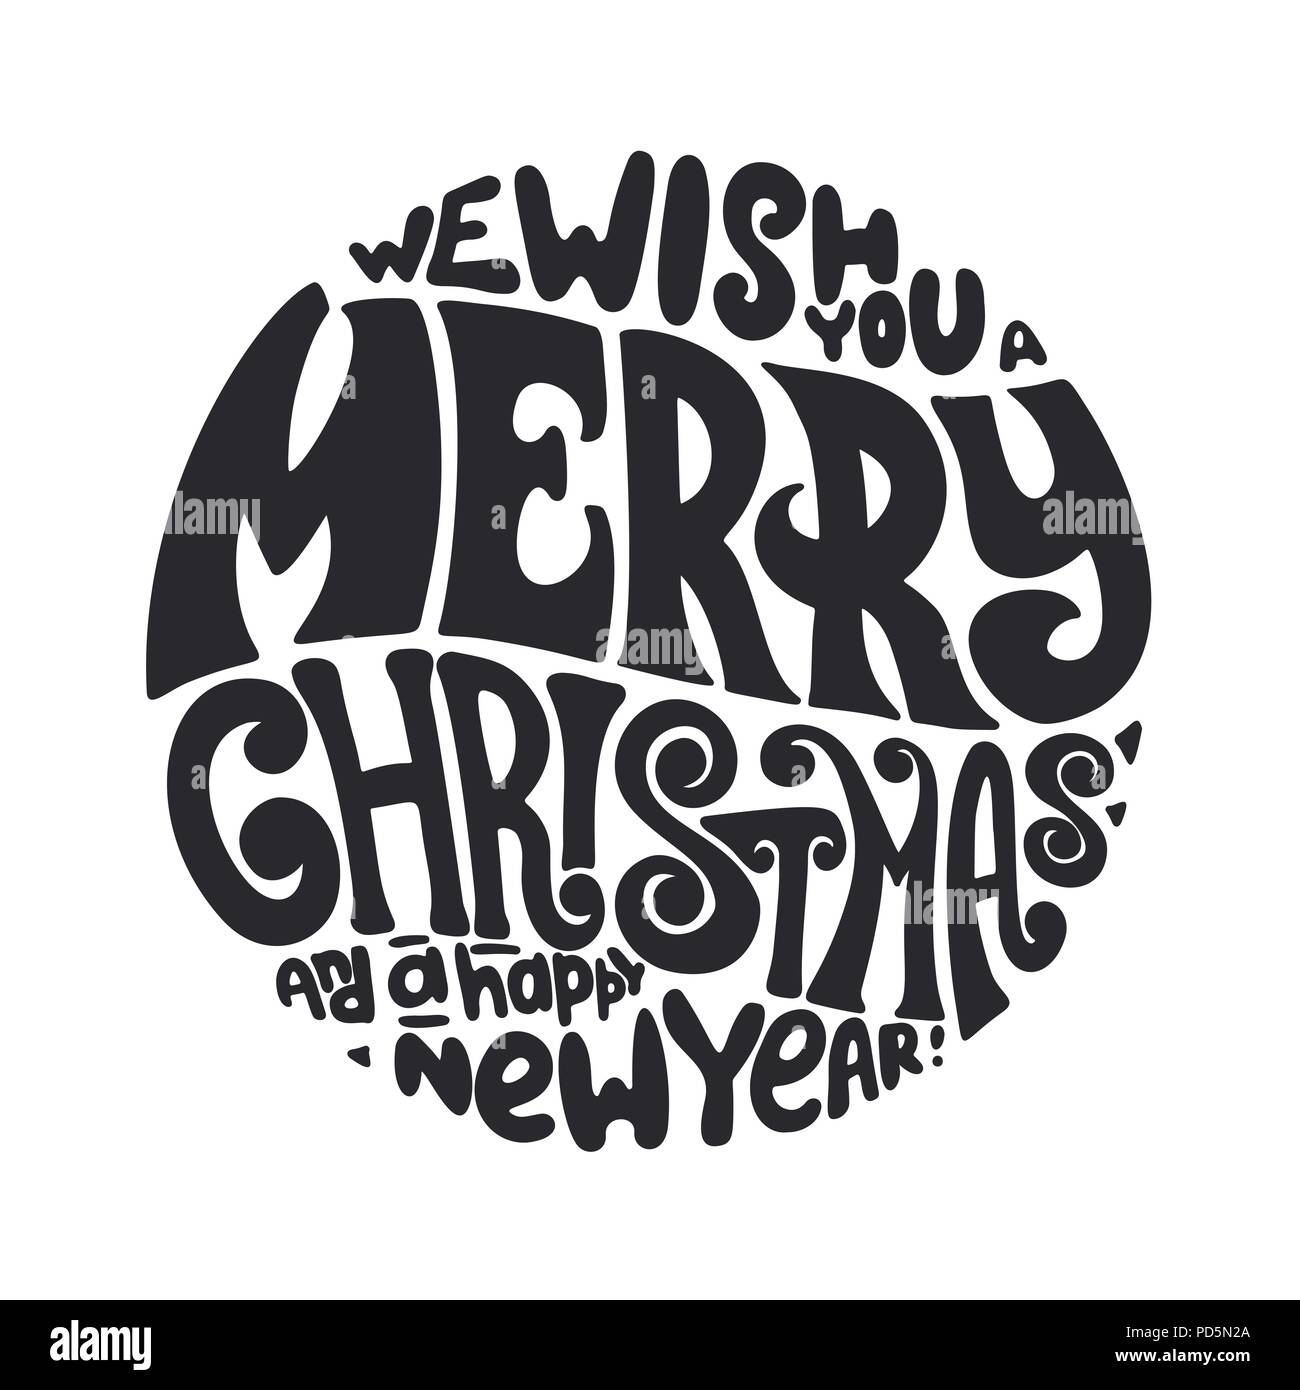 We wish you a Merry Christmas and Happy New Year typography Stock Vector